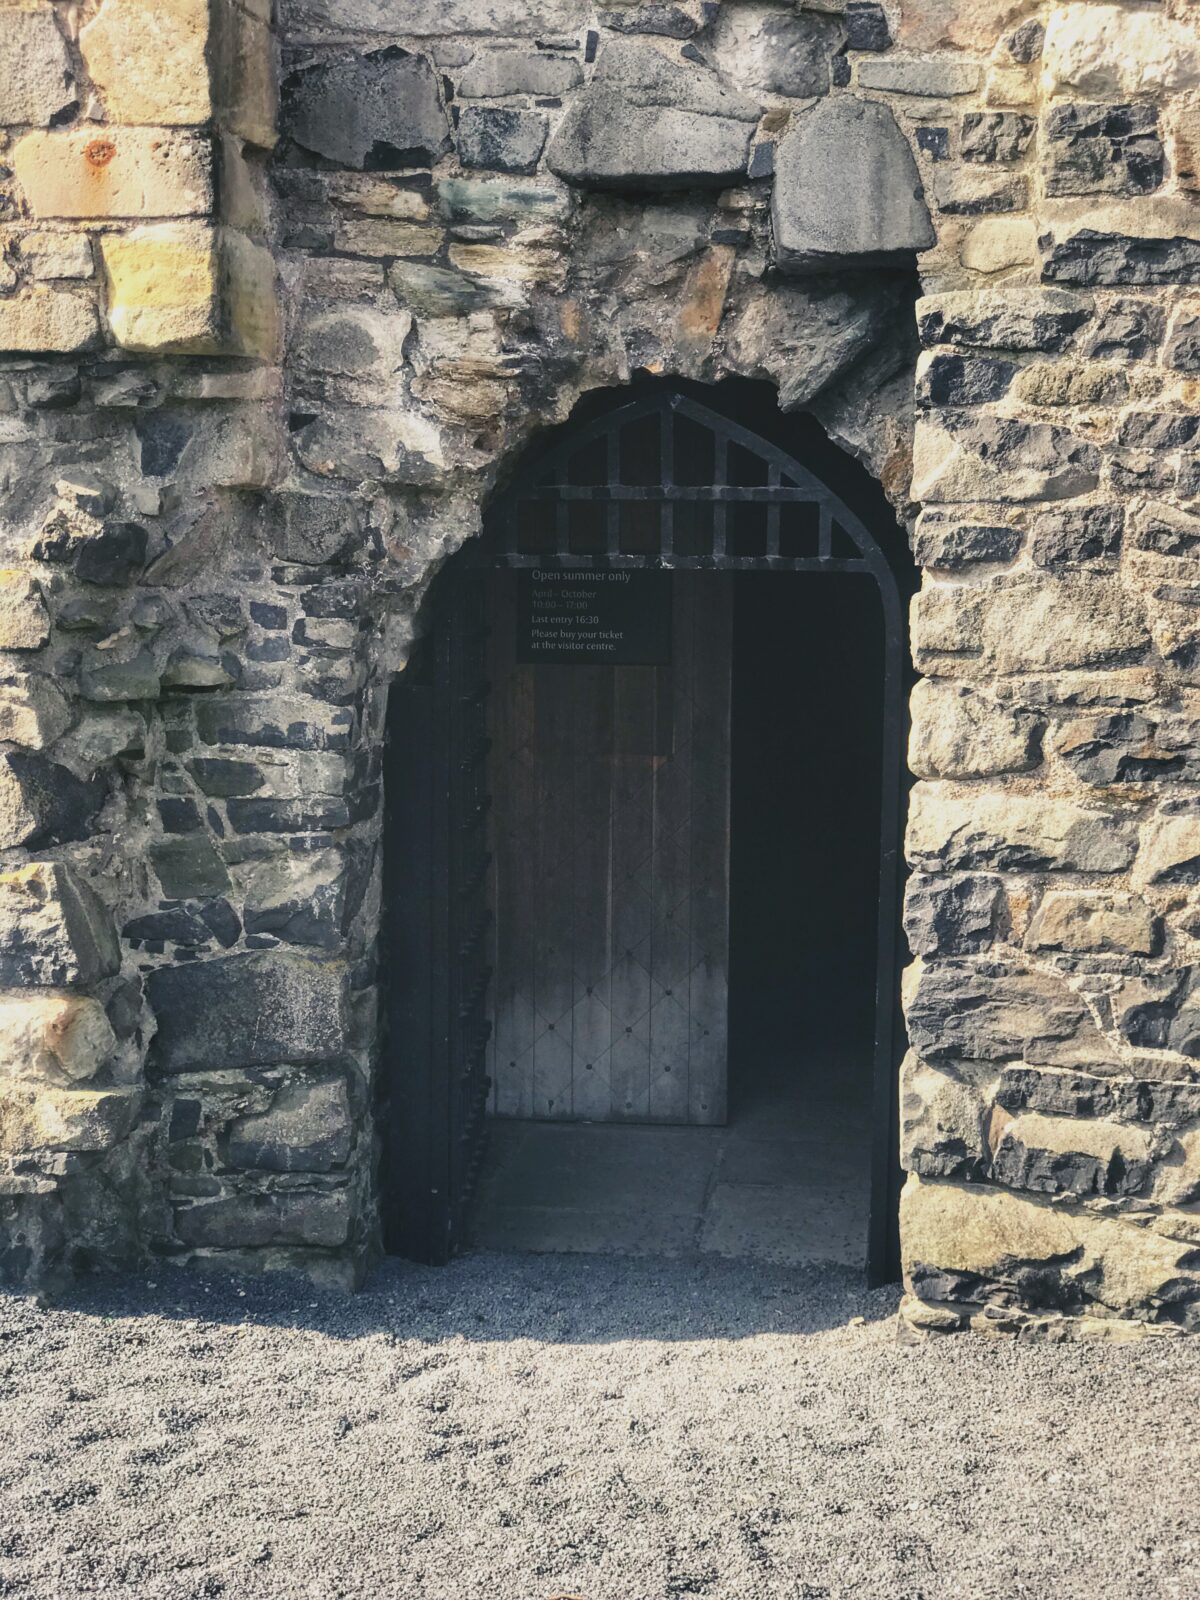 The doorway into Dundonald Castle with an iron arch and door